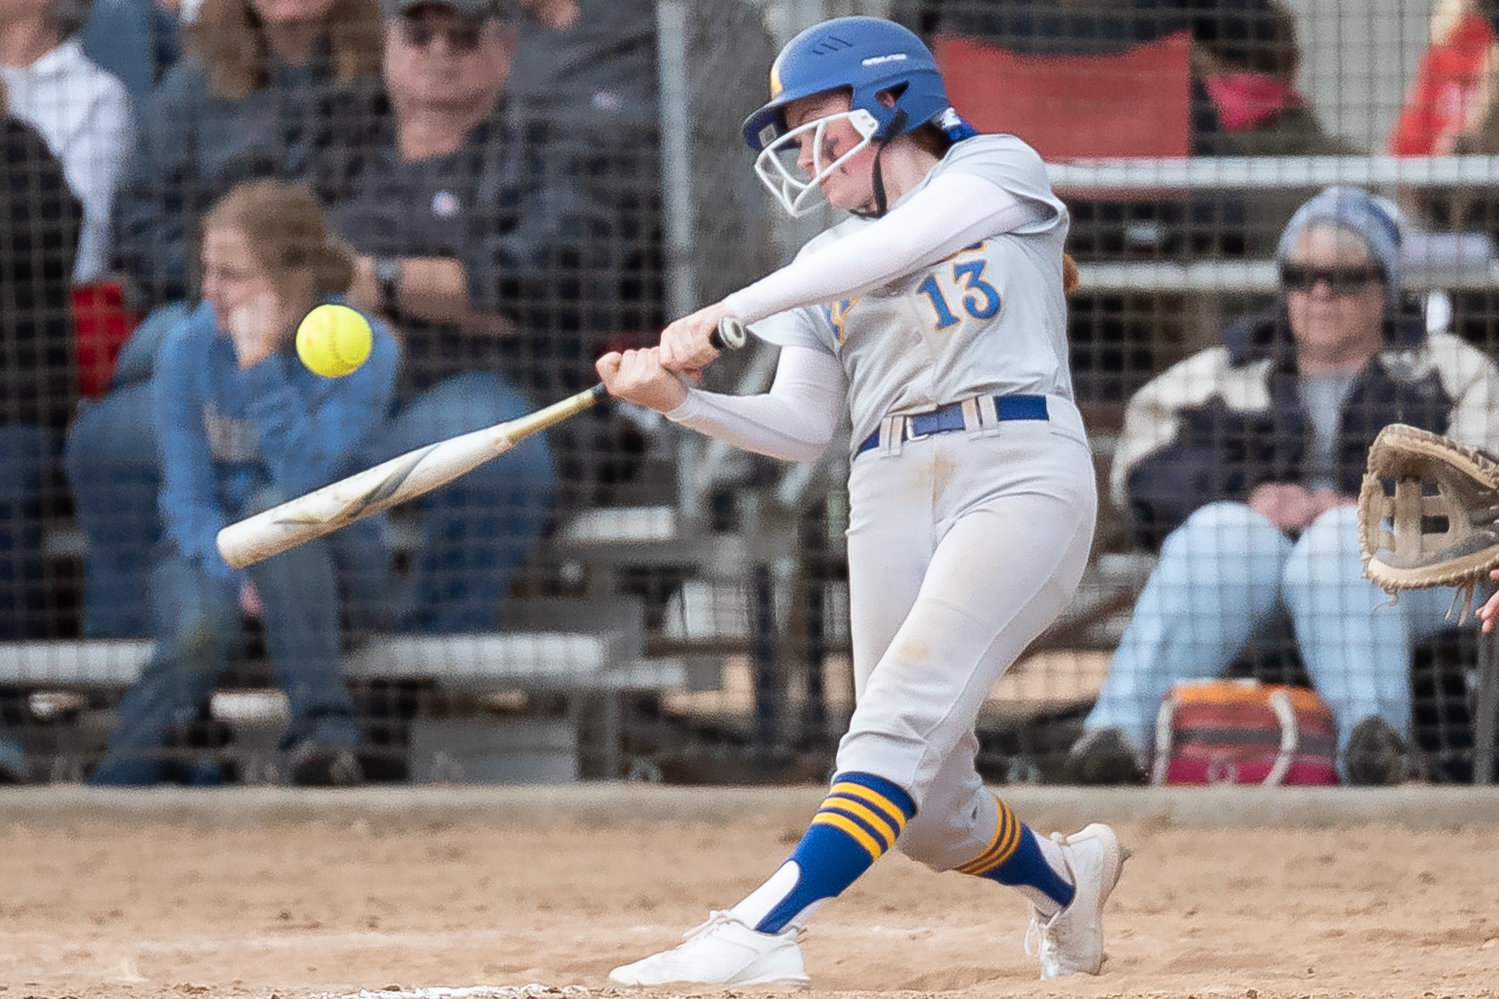 Adna's Natalie Loose makes contact with a pitch against PWV in the 2B District 4 softball championship game at Fort Borst Park in Centralia May 21.